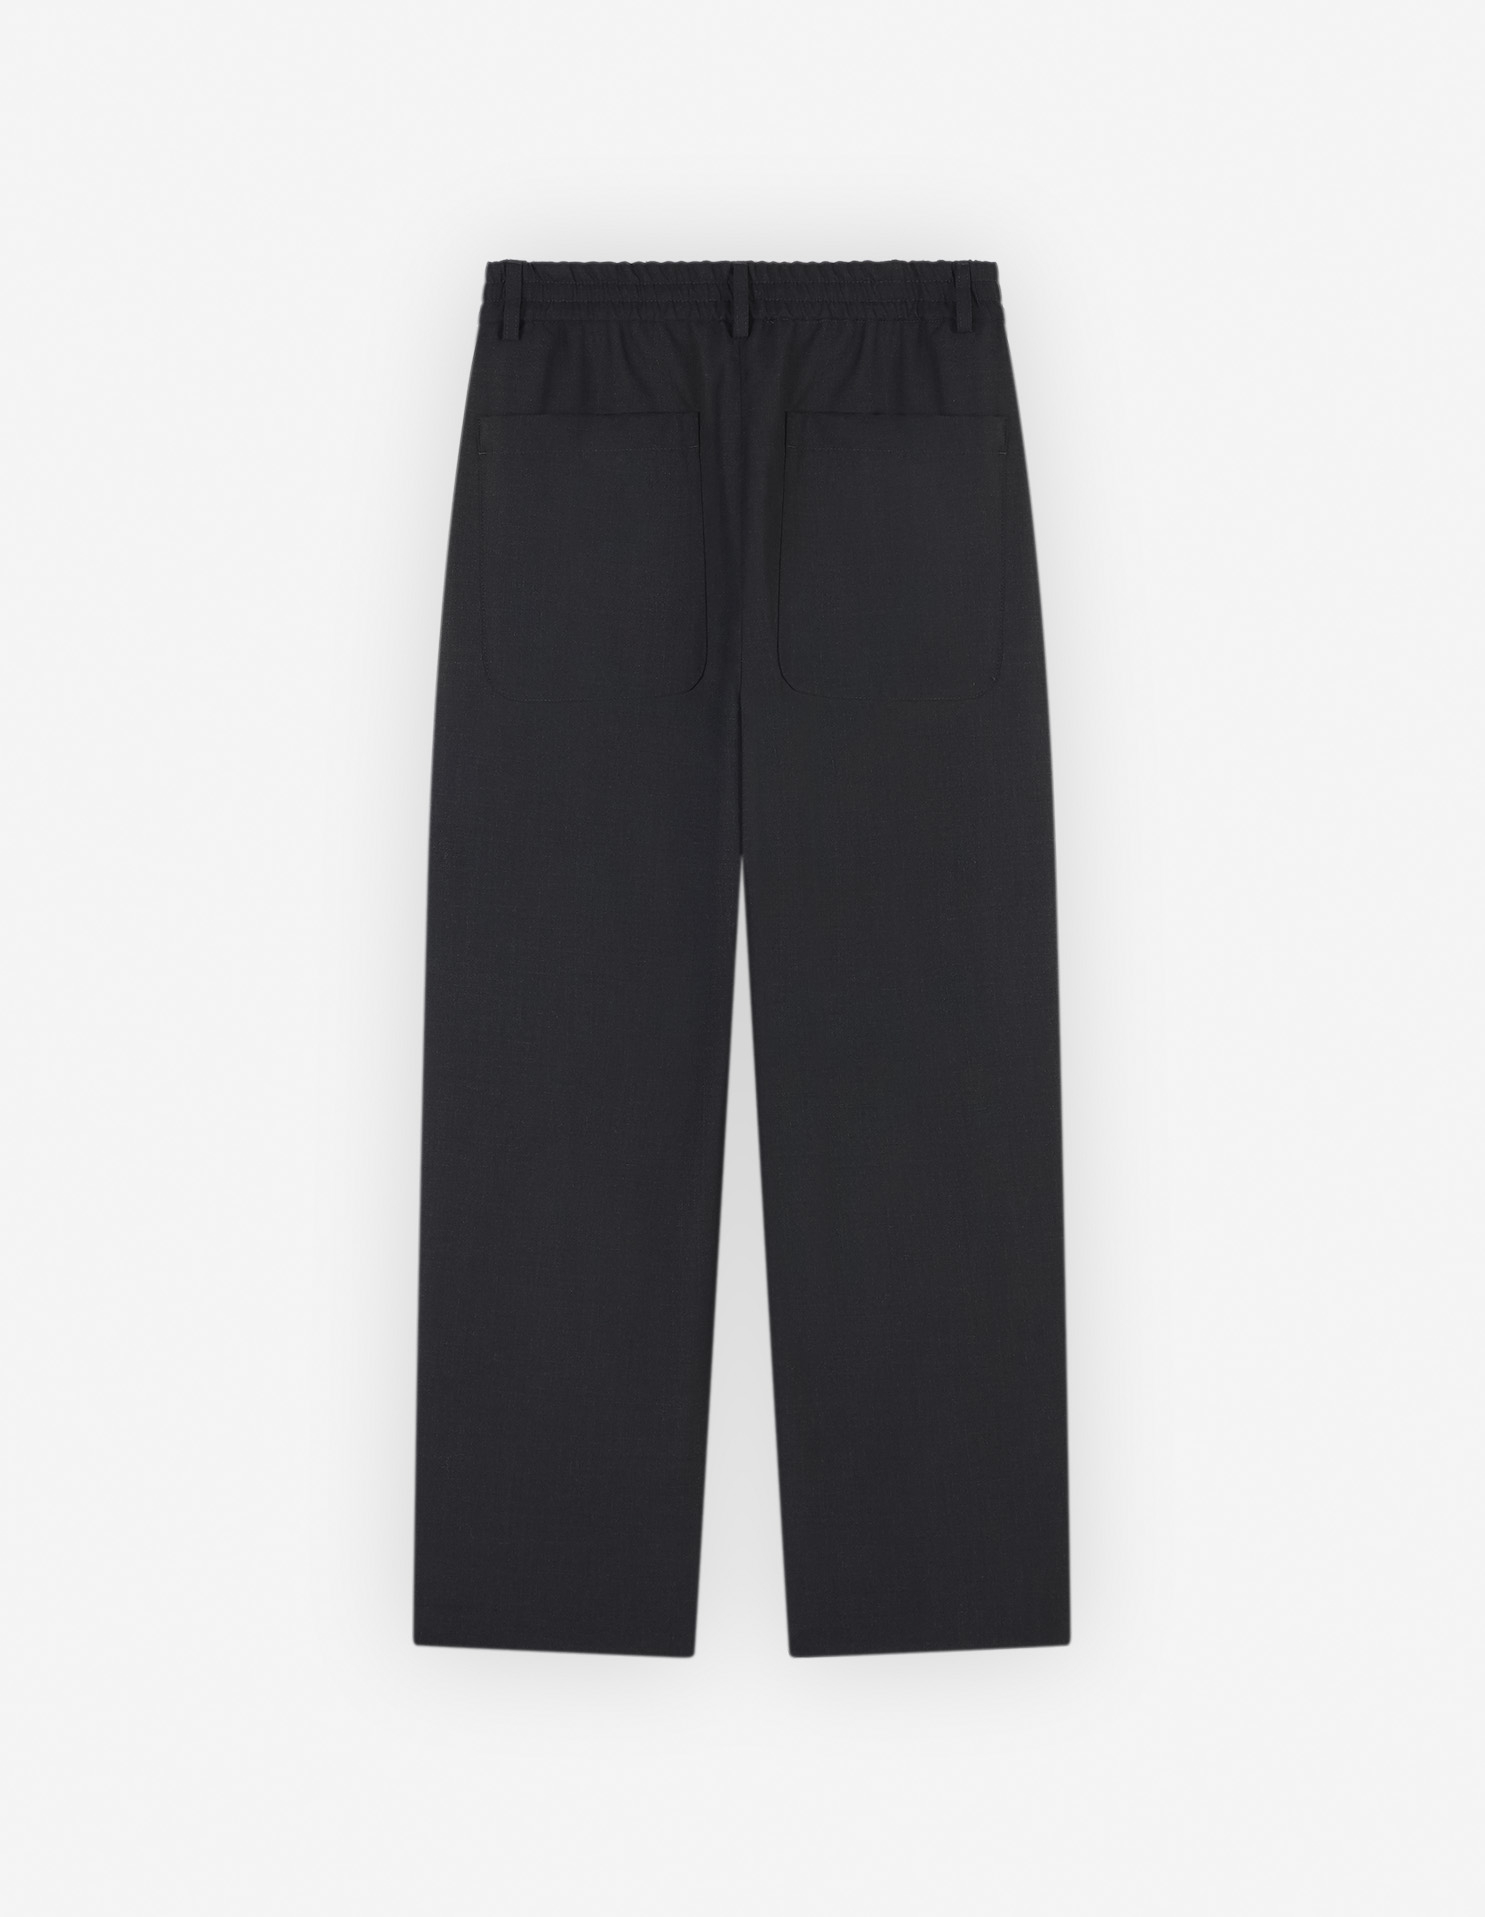 CROPPED PLEATED TAILORED PANTS IN LIGHT TECHNICAL WOOL | Maison